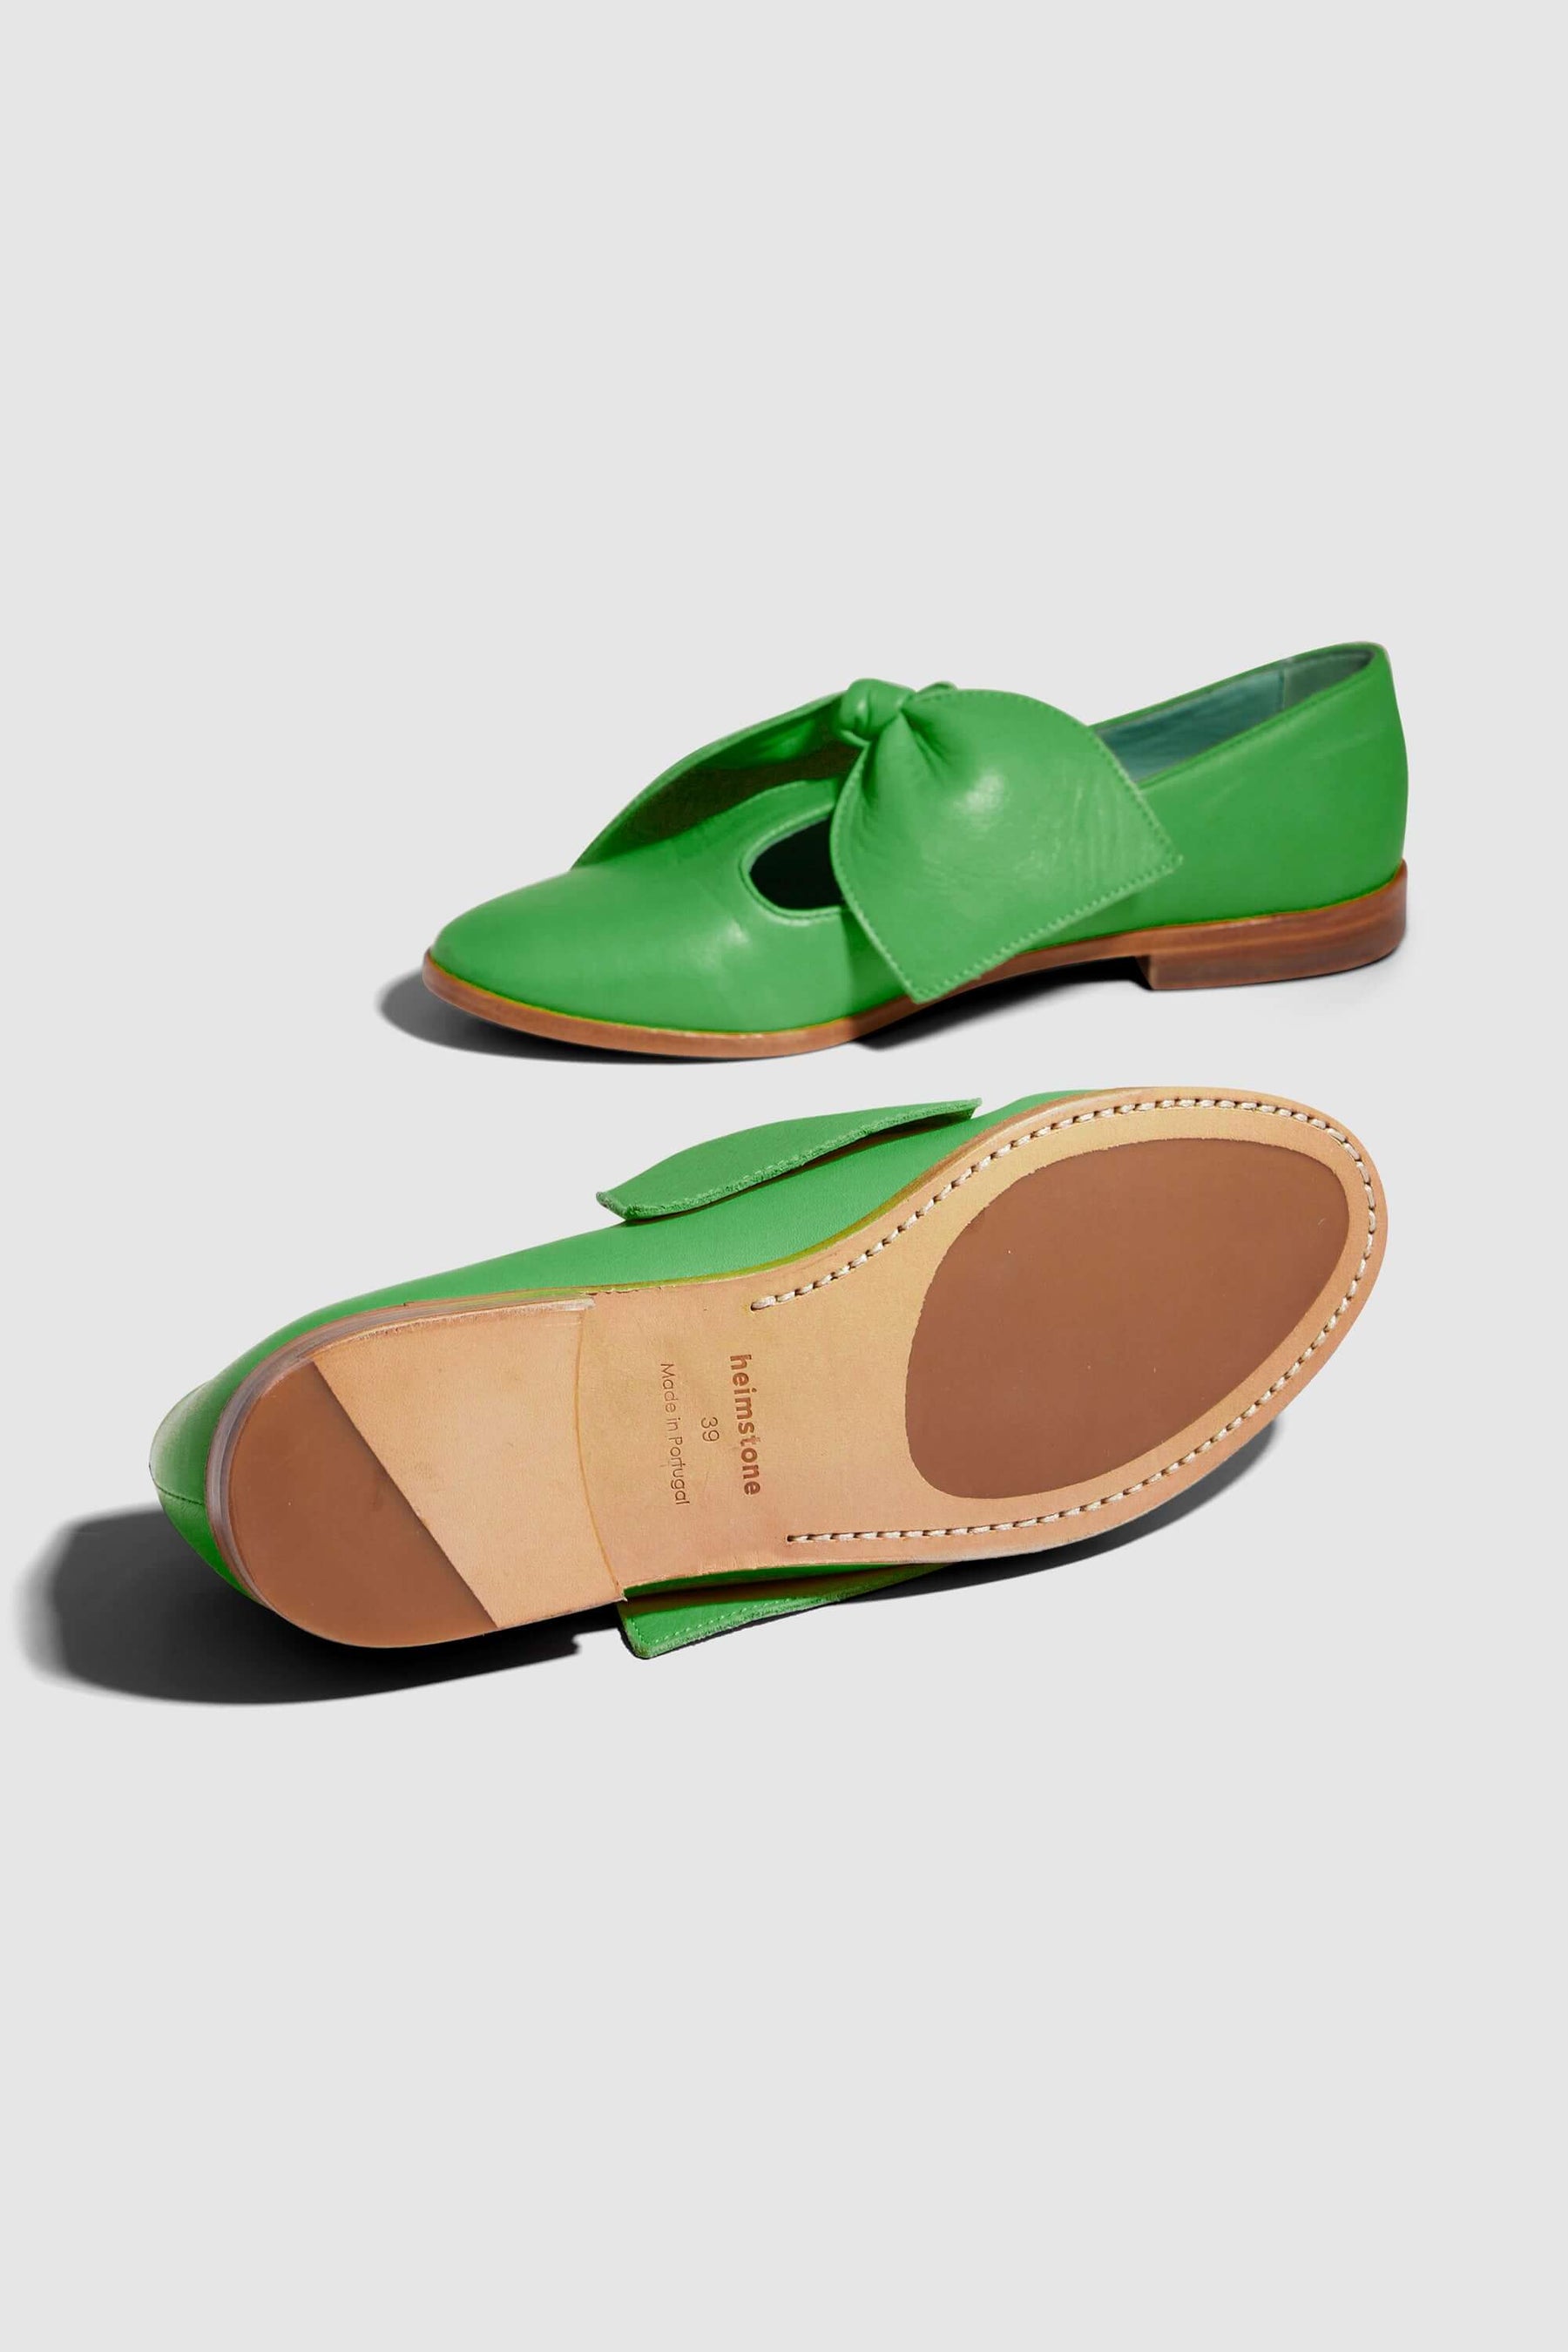 BB ballerina shoes in green leather